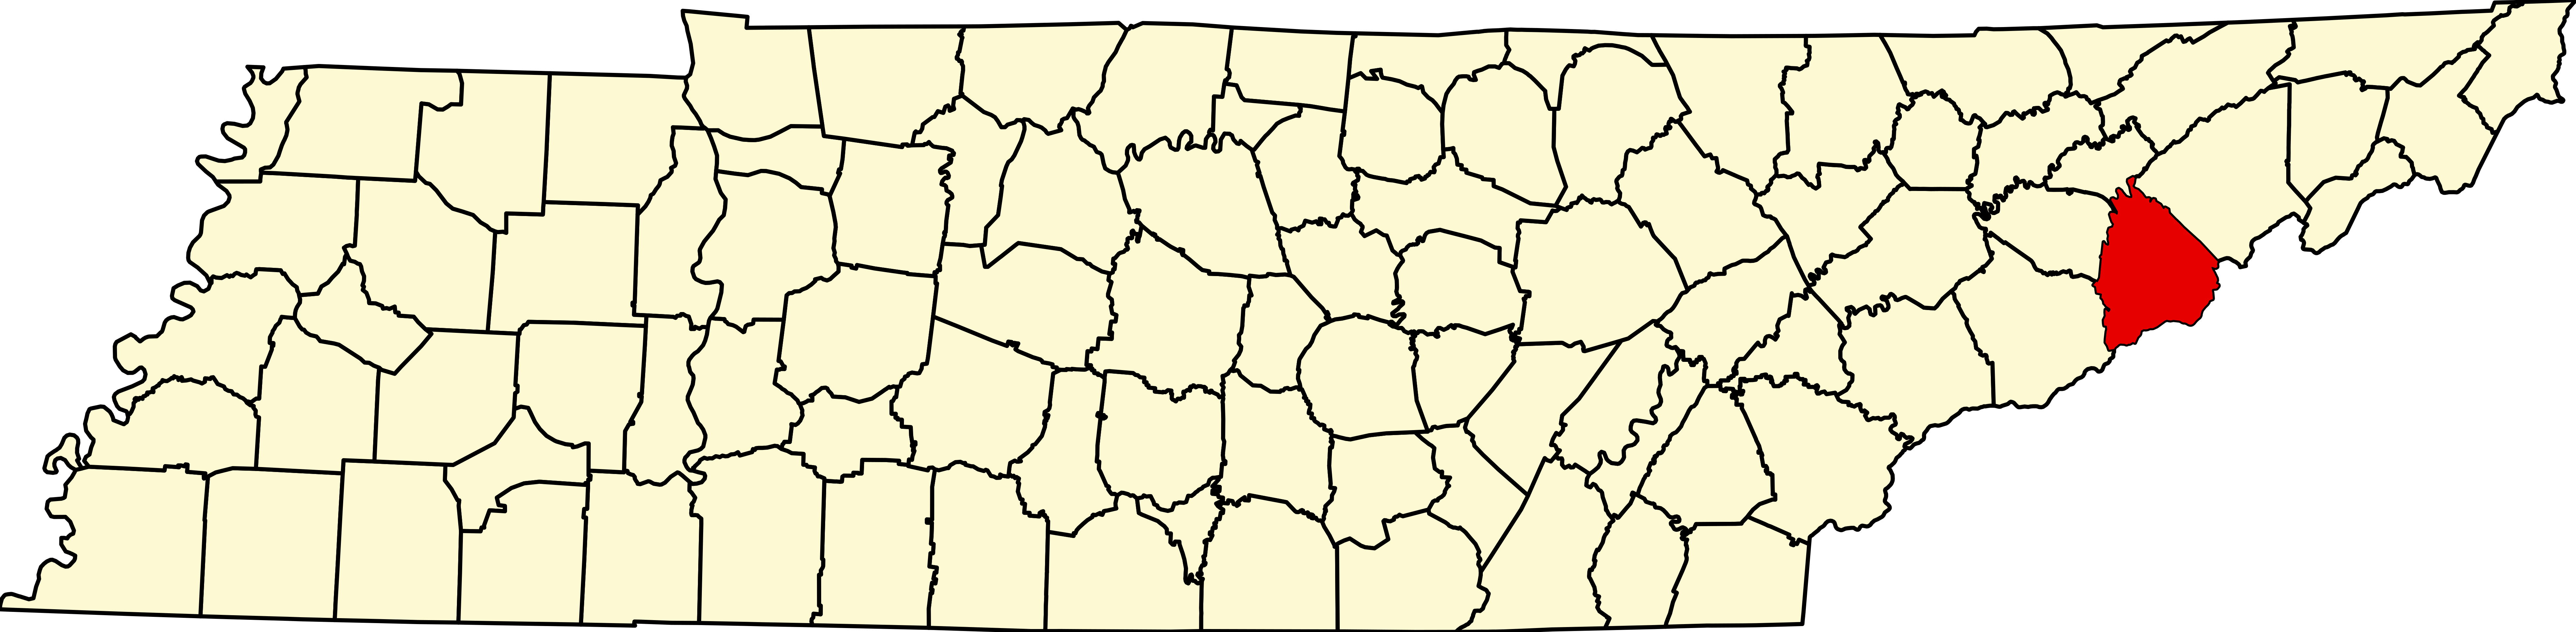 upload.wikimedia.org/wikipedia/commons/thumb/8/80/Map_of_Tennessee_highlighting_Cocke_County.svg/7814px-Map_of_Tennessee_highlighting_Cocke_County.svg.png